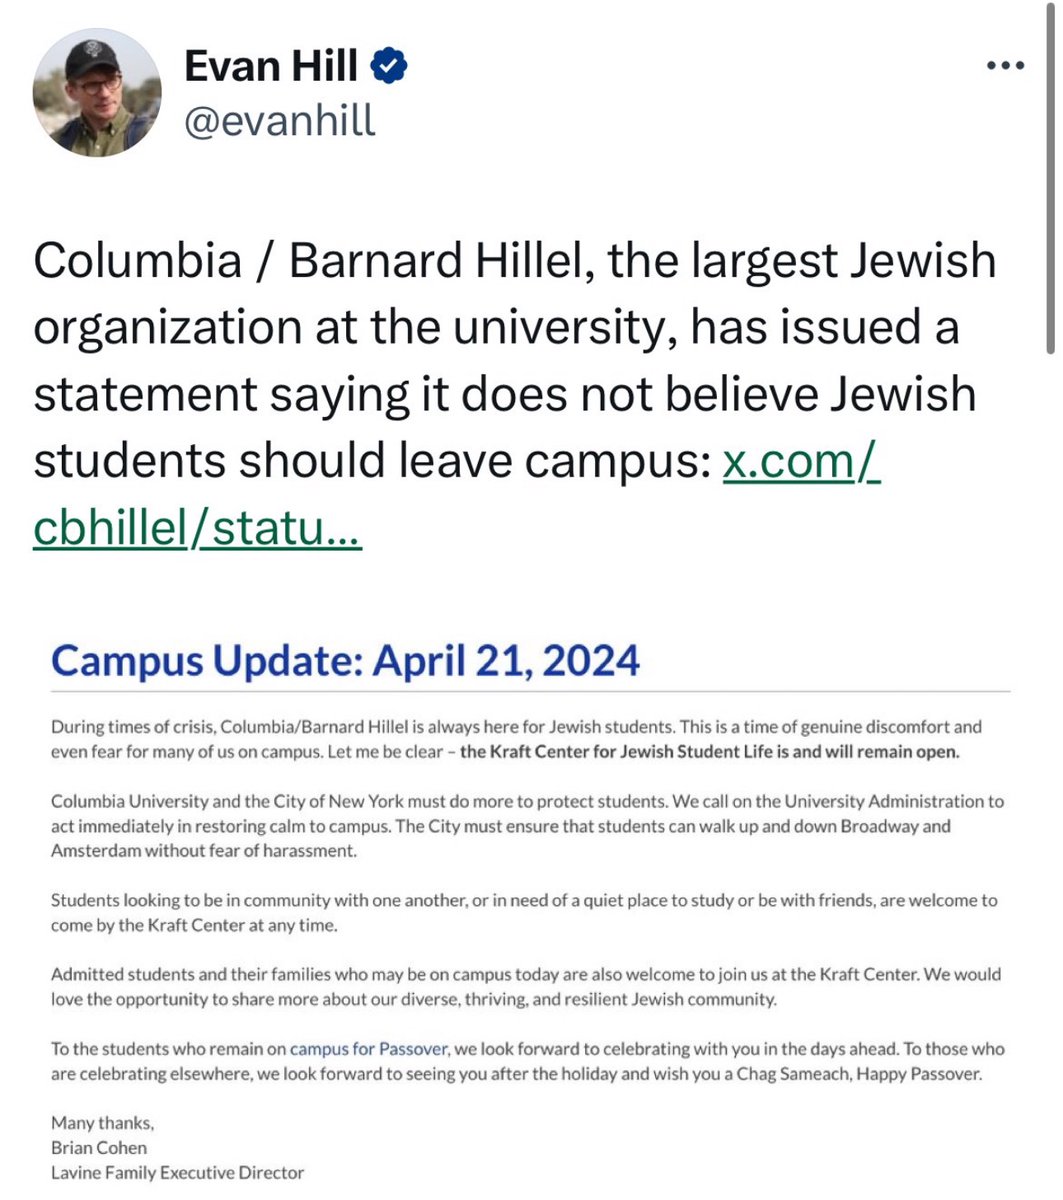 LARGEST JEWISH ORGANIZATION AT THE UNIVERSITY DO NOT BELIEVE JEWISH STUDENTS SHOULD LEAVE THE CAMPUS